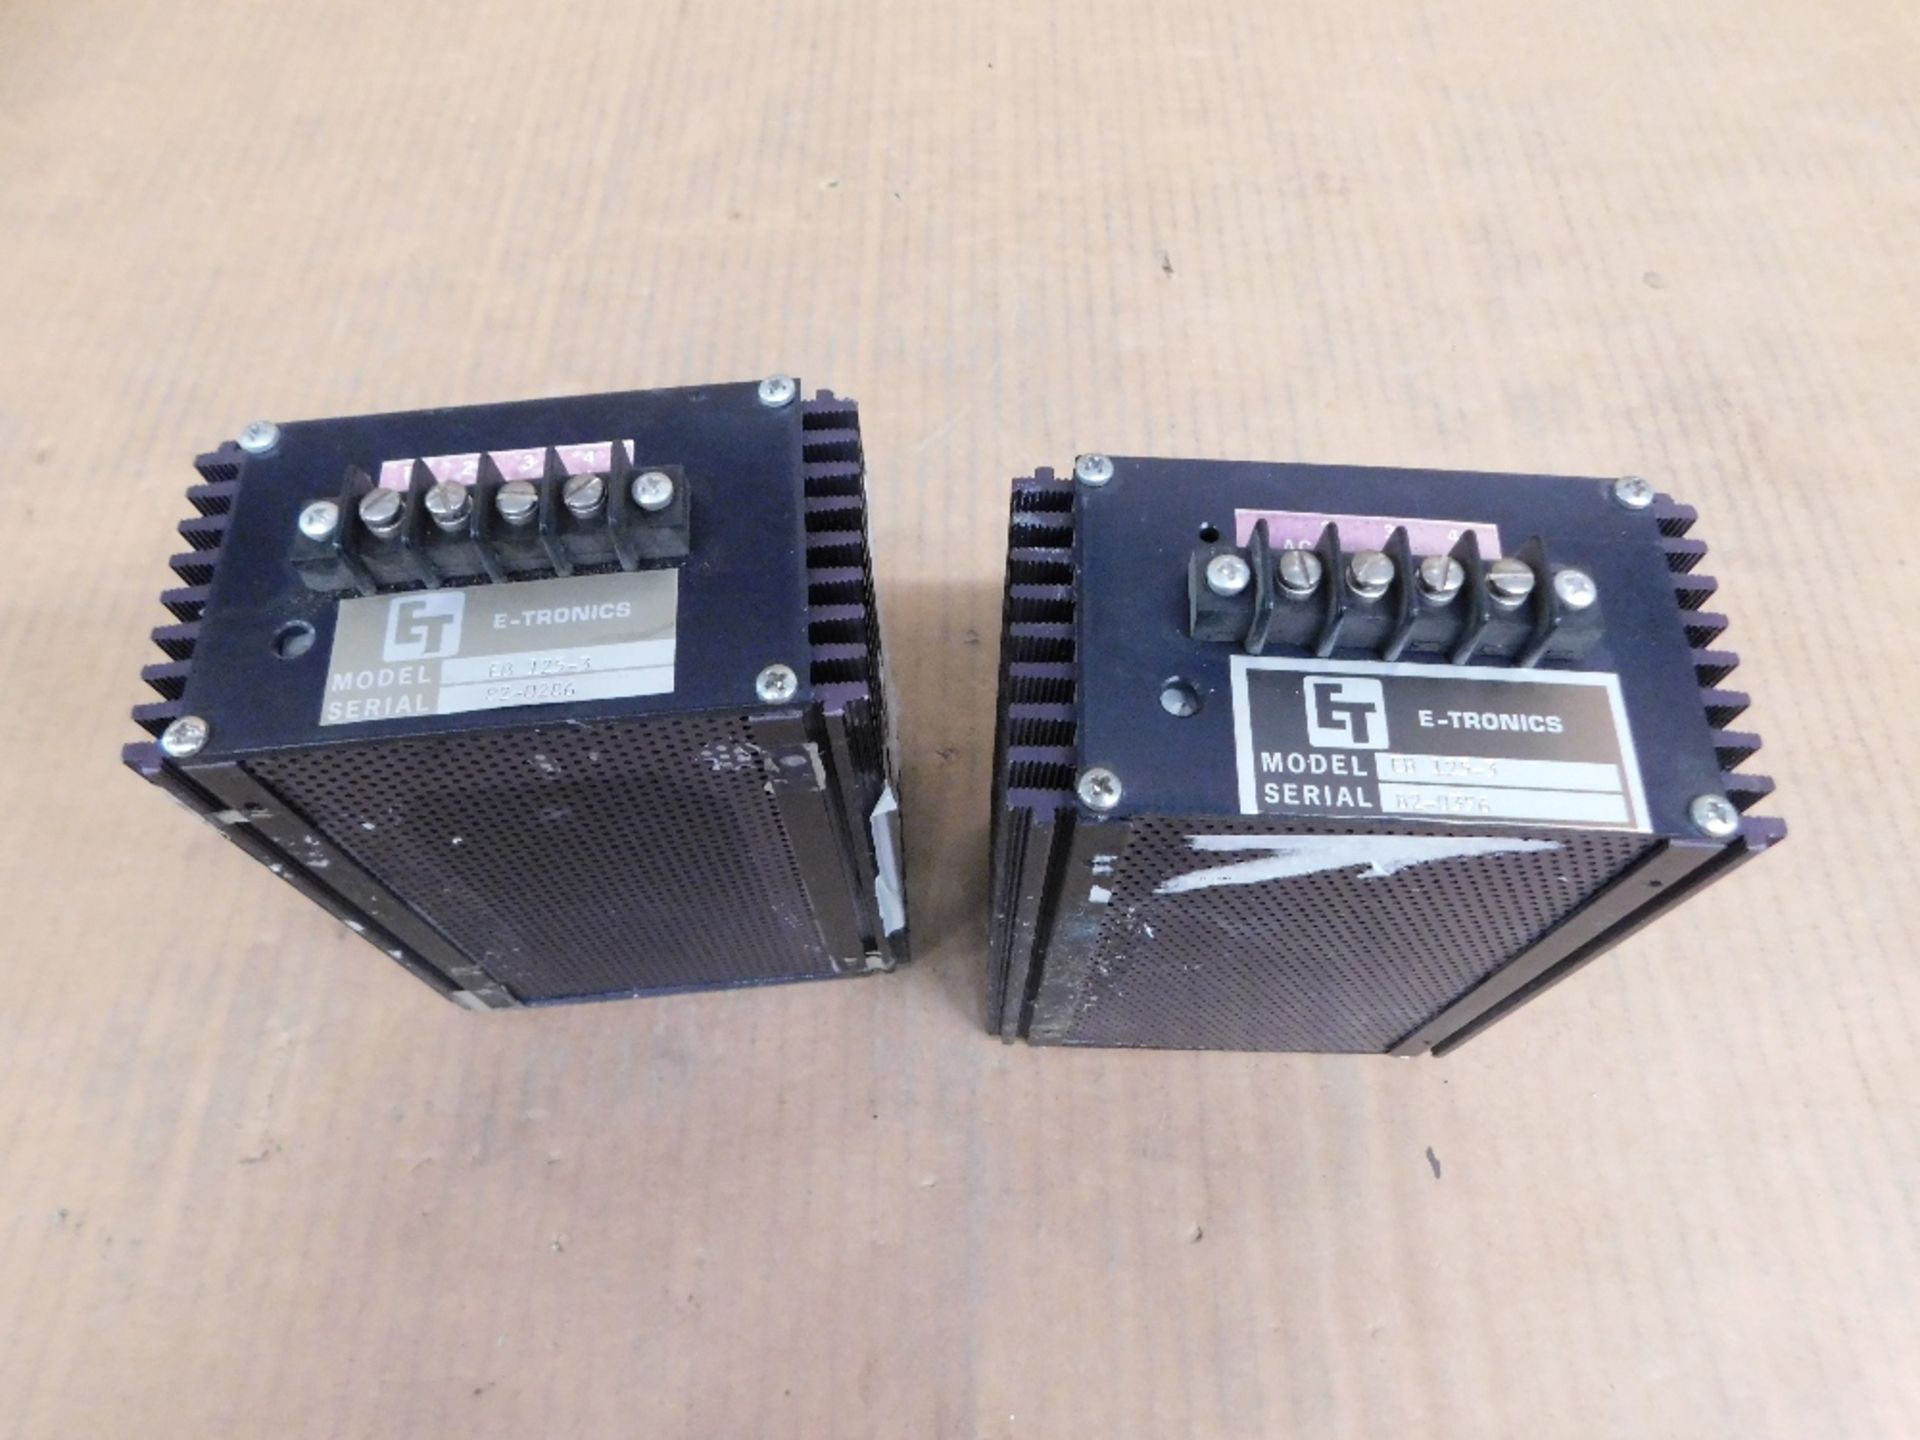 2x E-Tronics New No Box Surplus SF-418964 Other Power Supplies - Image 2 of 4